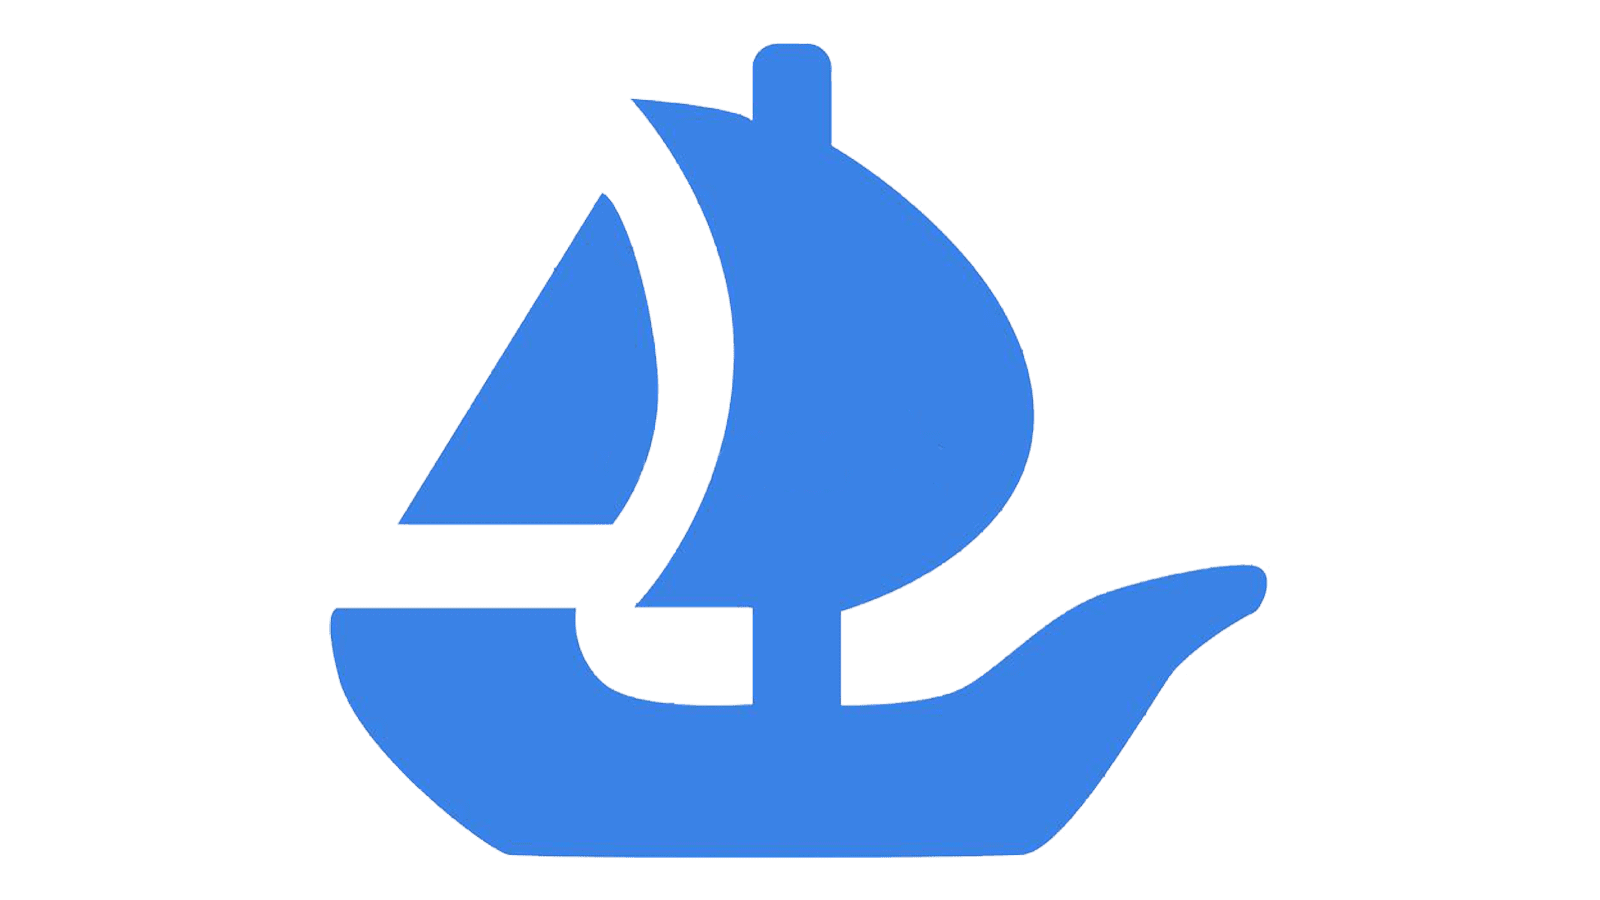 OpenSea Logo and symbol, meaning, history, PNG, brand